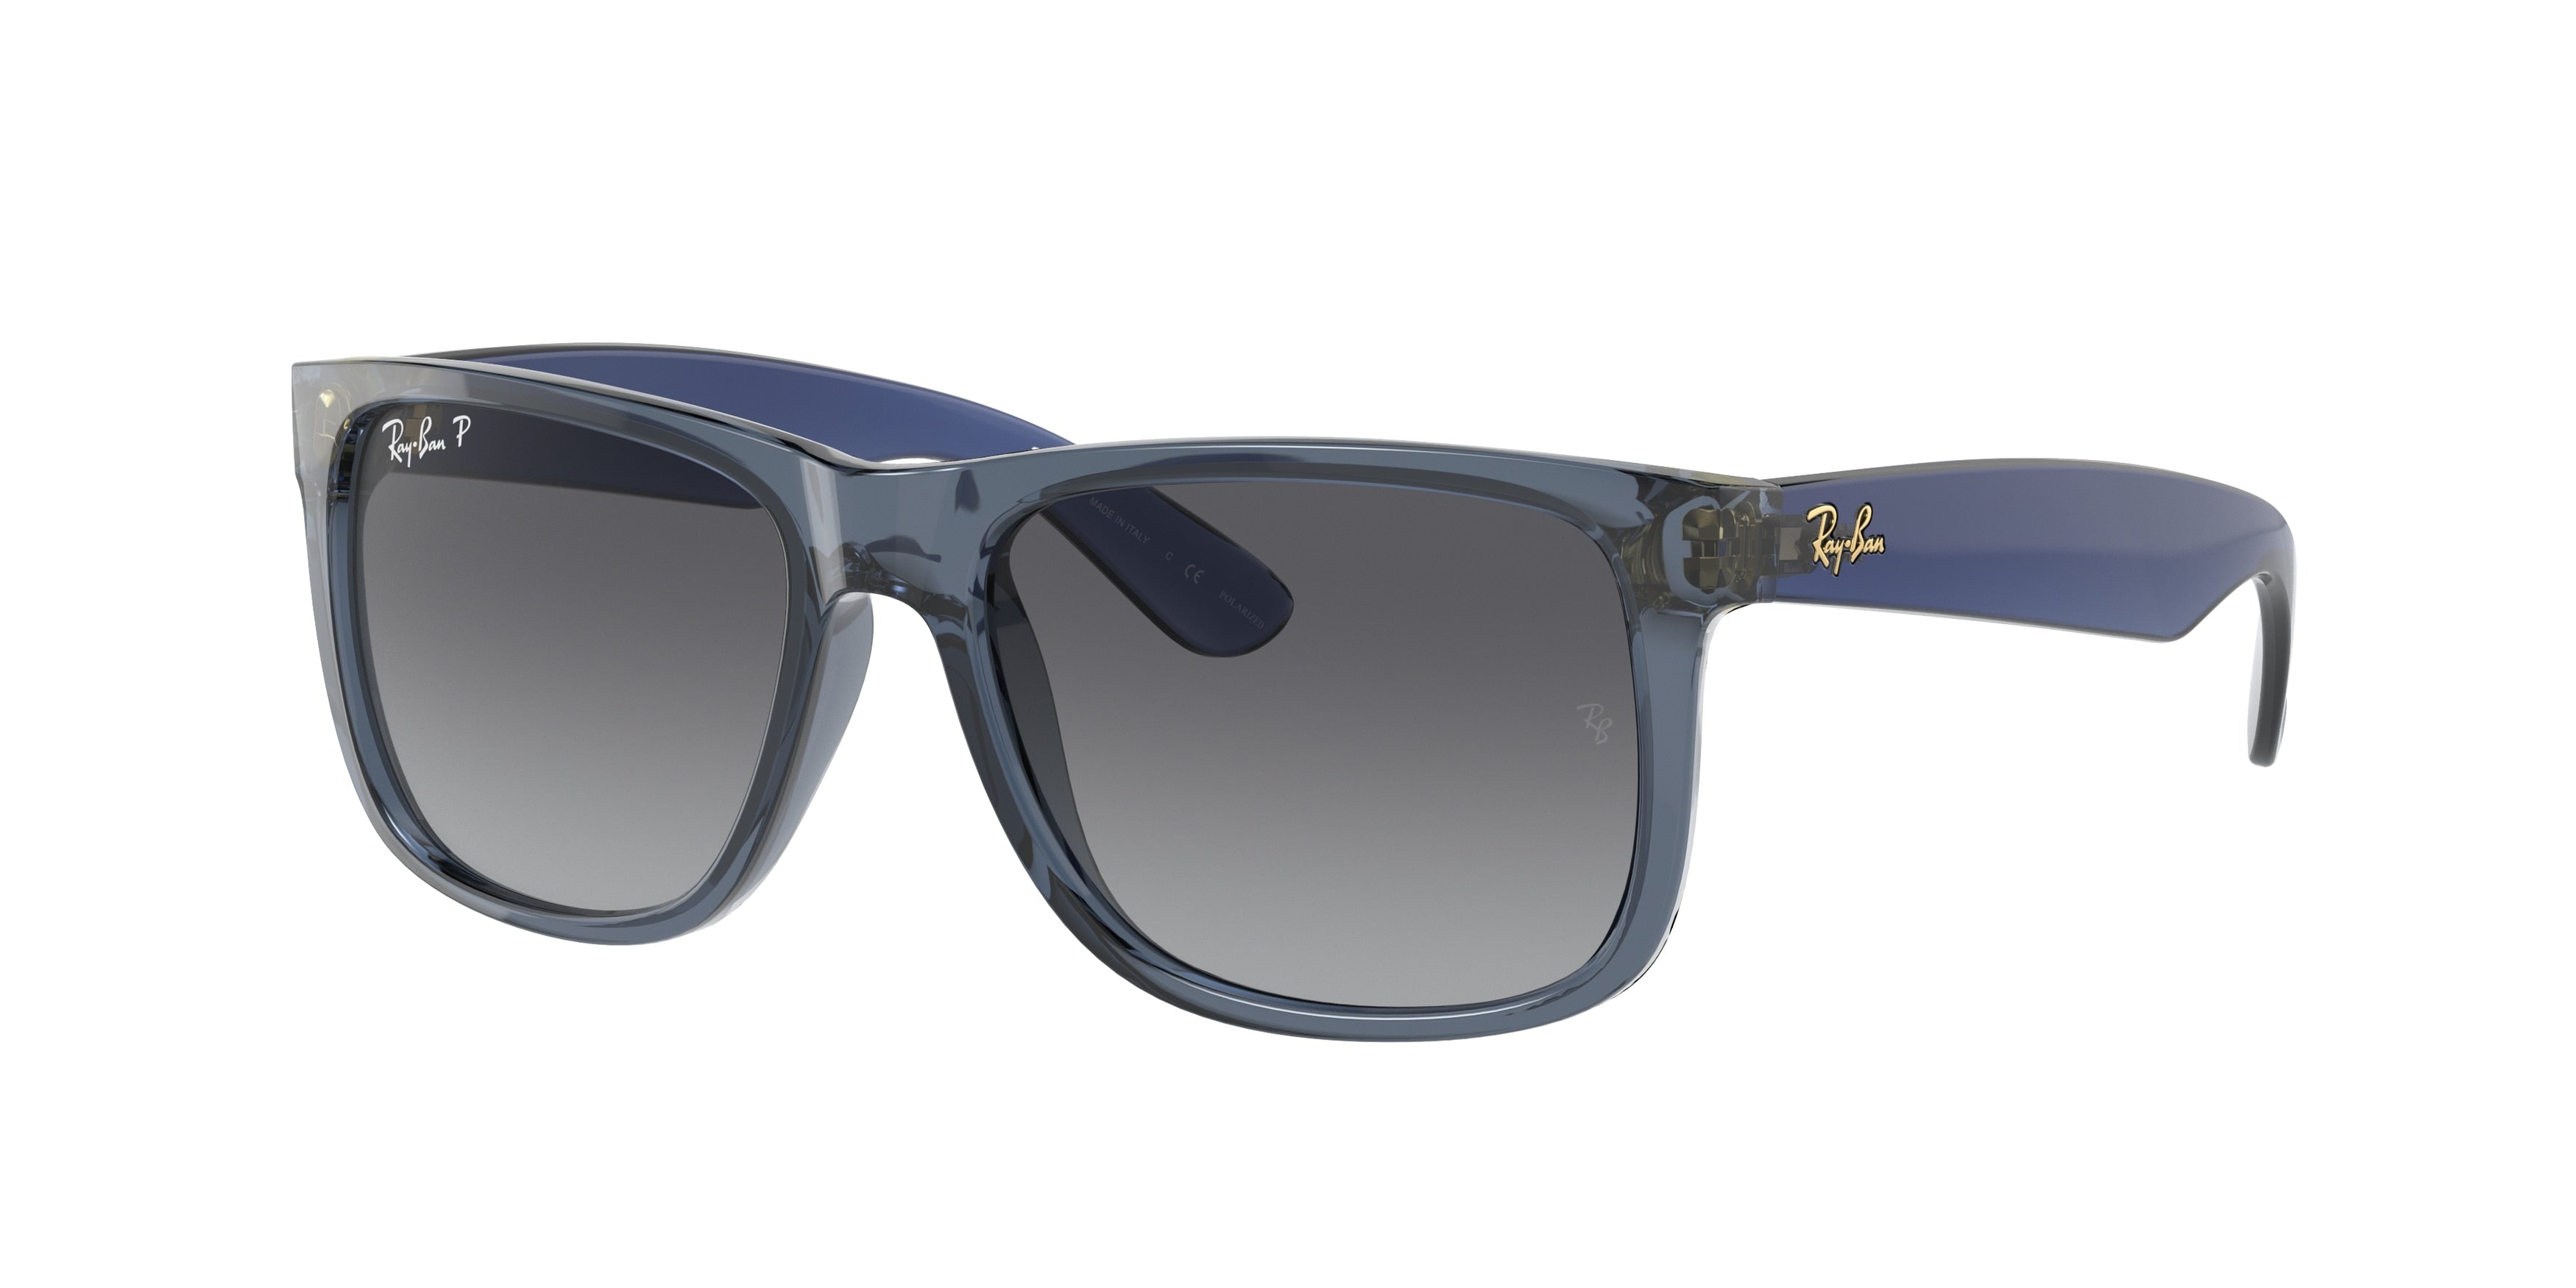 Ray-Ban JUSTIN RB4165 Square Sunglasses  6596T3-Transparent Blue 53-145-16 - Color Map Blue